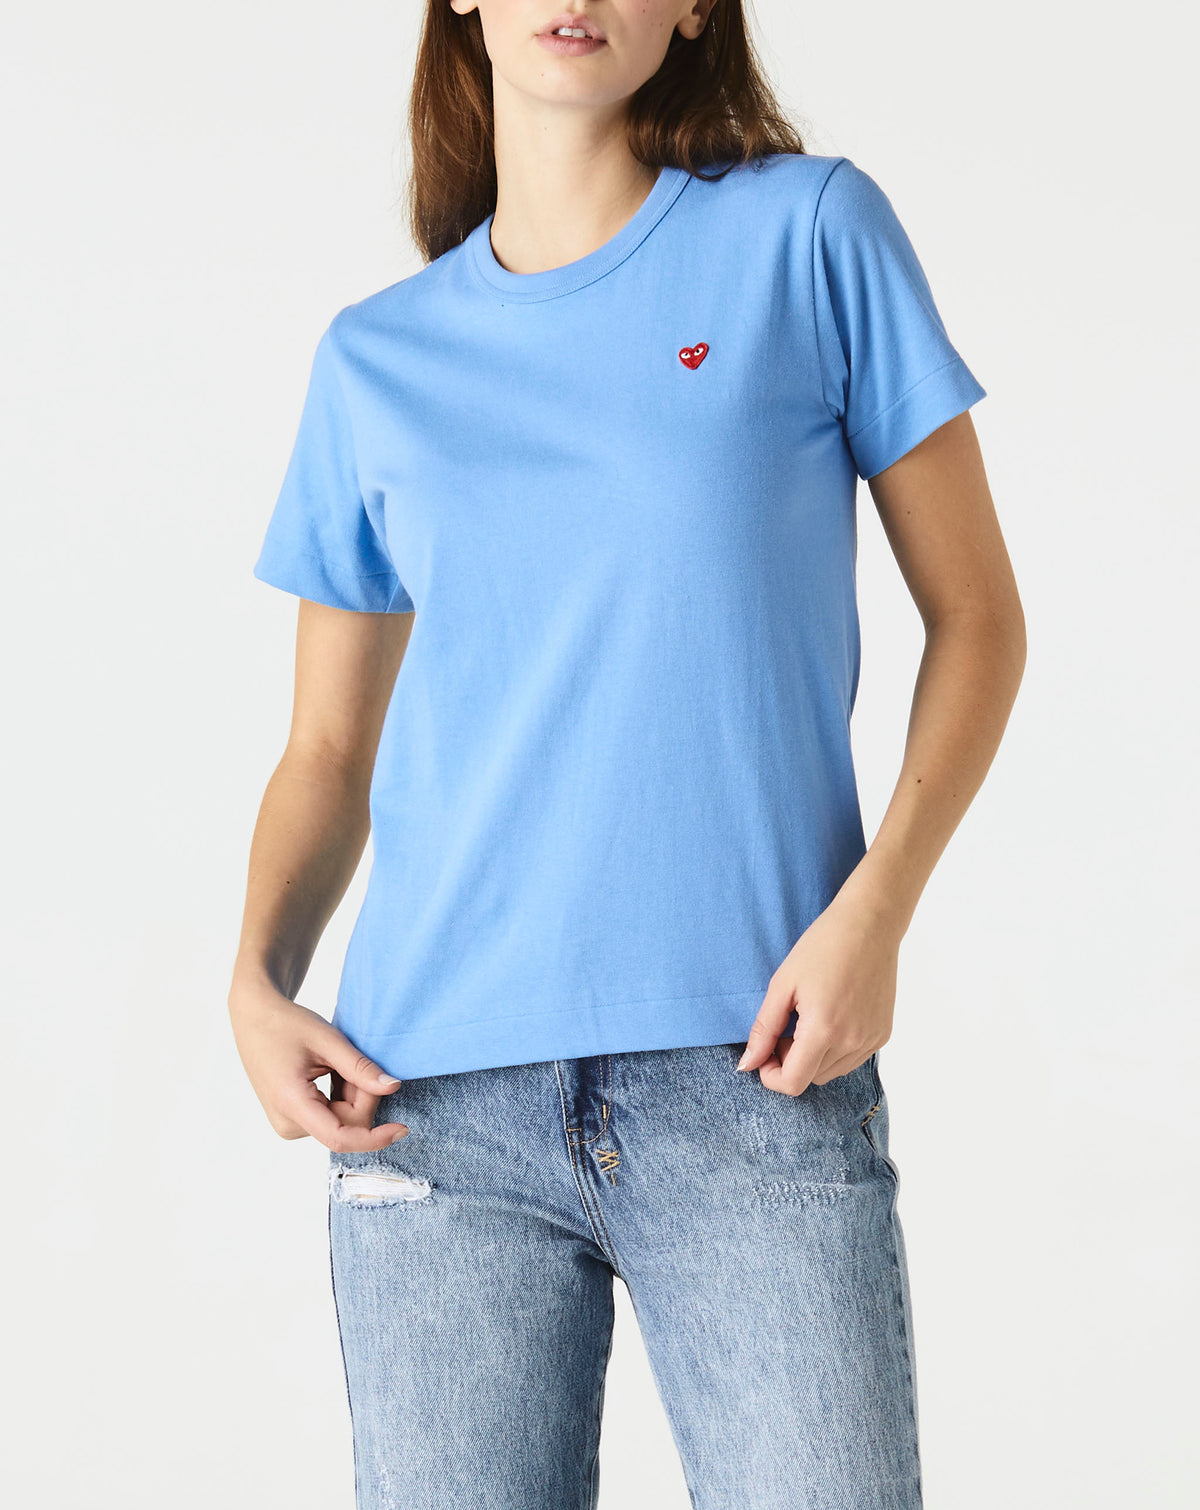 Comme des Garcons PLAY Women's Small Red Heart T-Shirt - Rule of Next Apparel